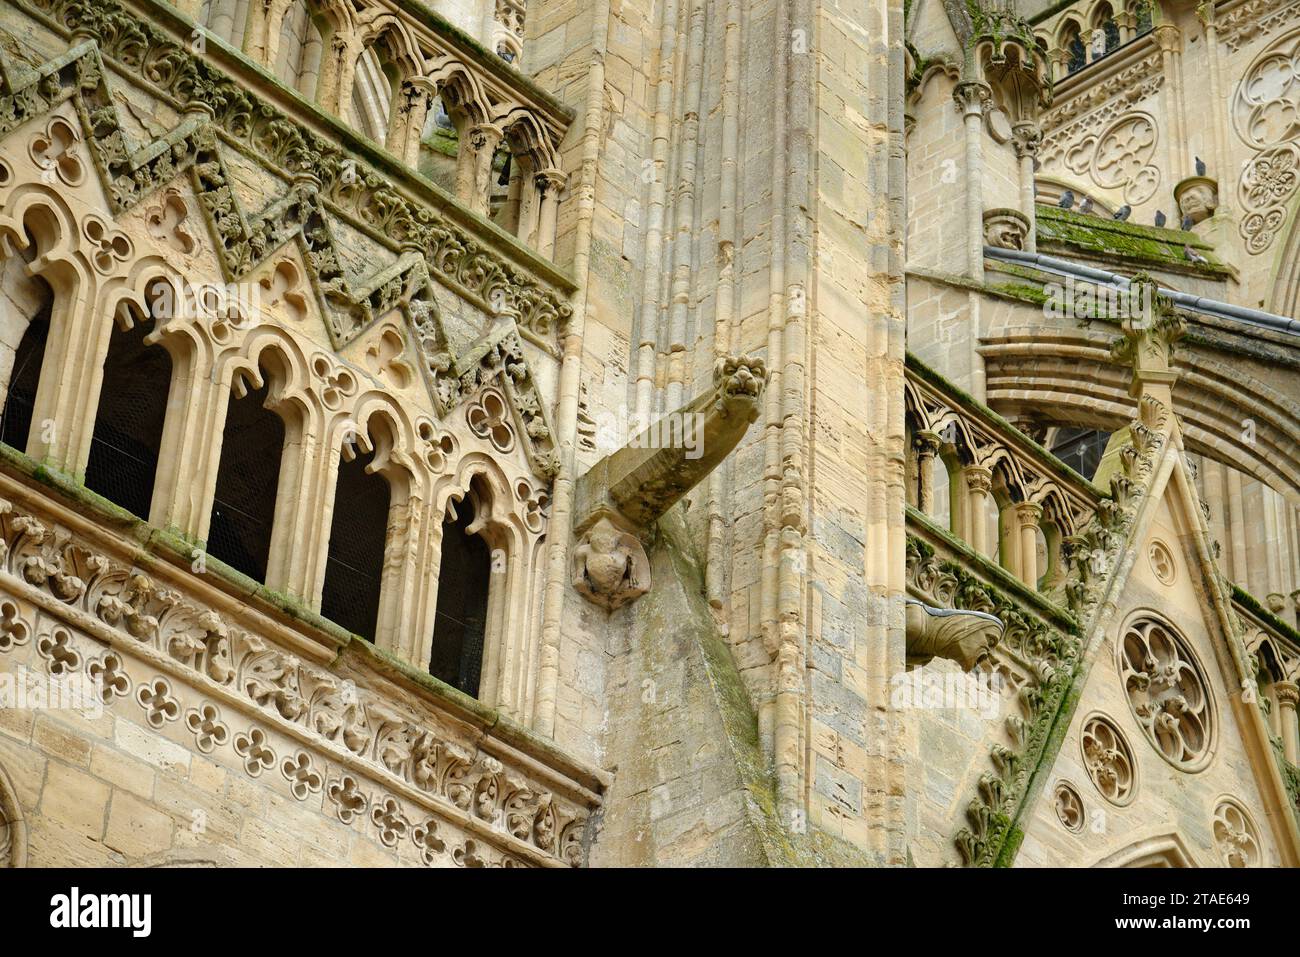 Gargoyles on the outside of Bayeux cathedral in Normandy, France. Stock Photo